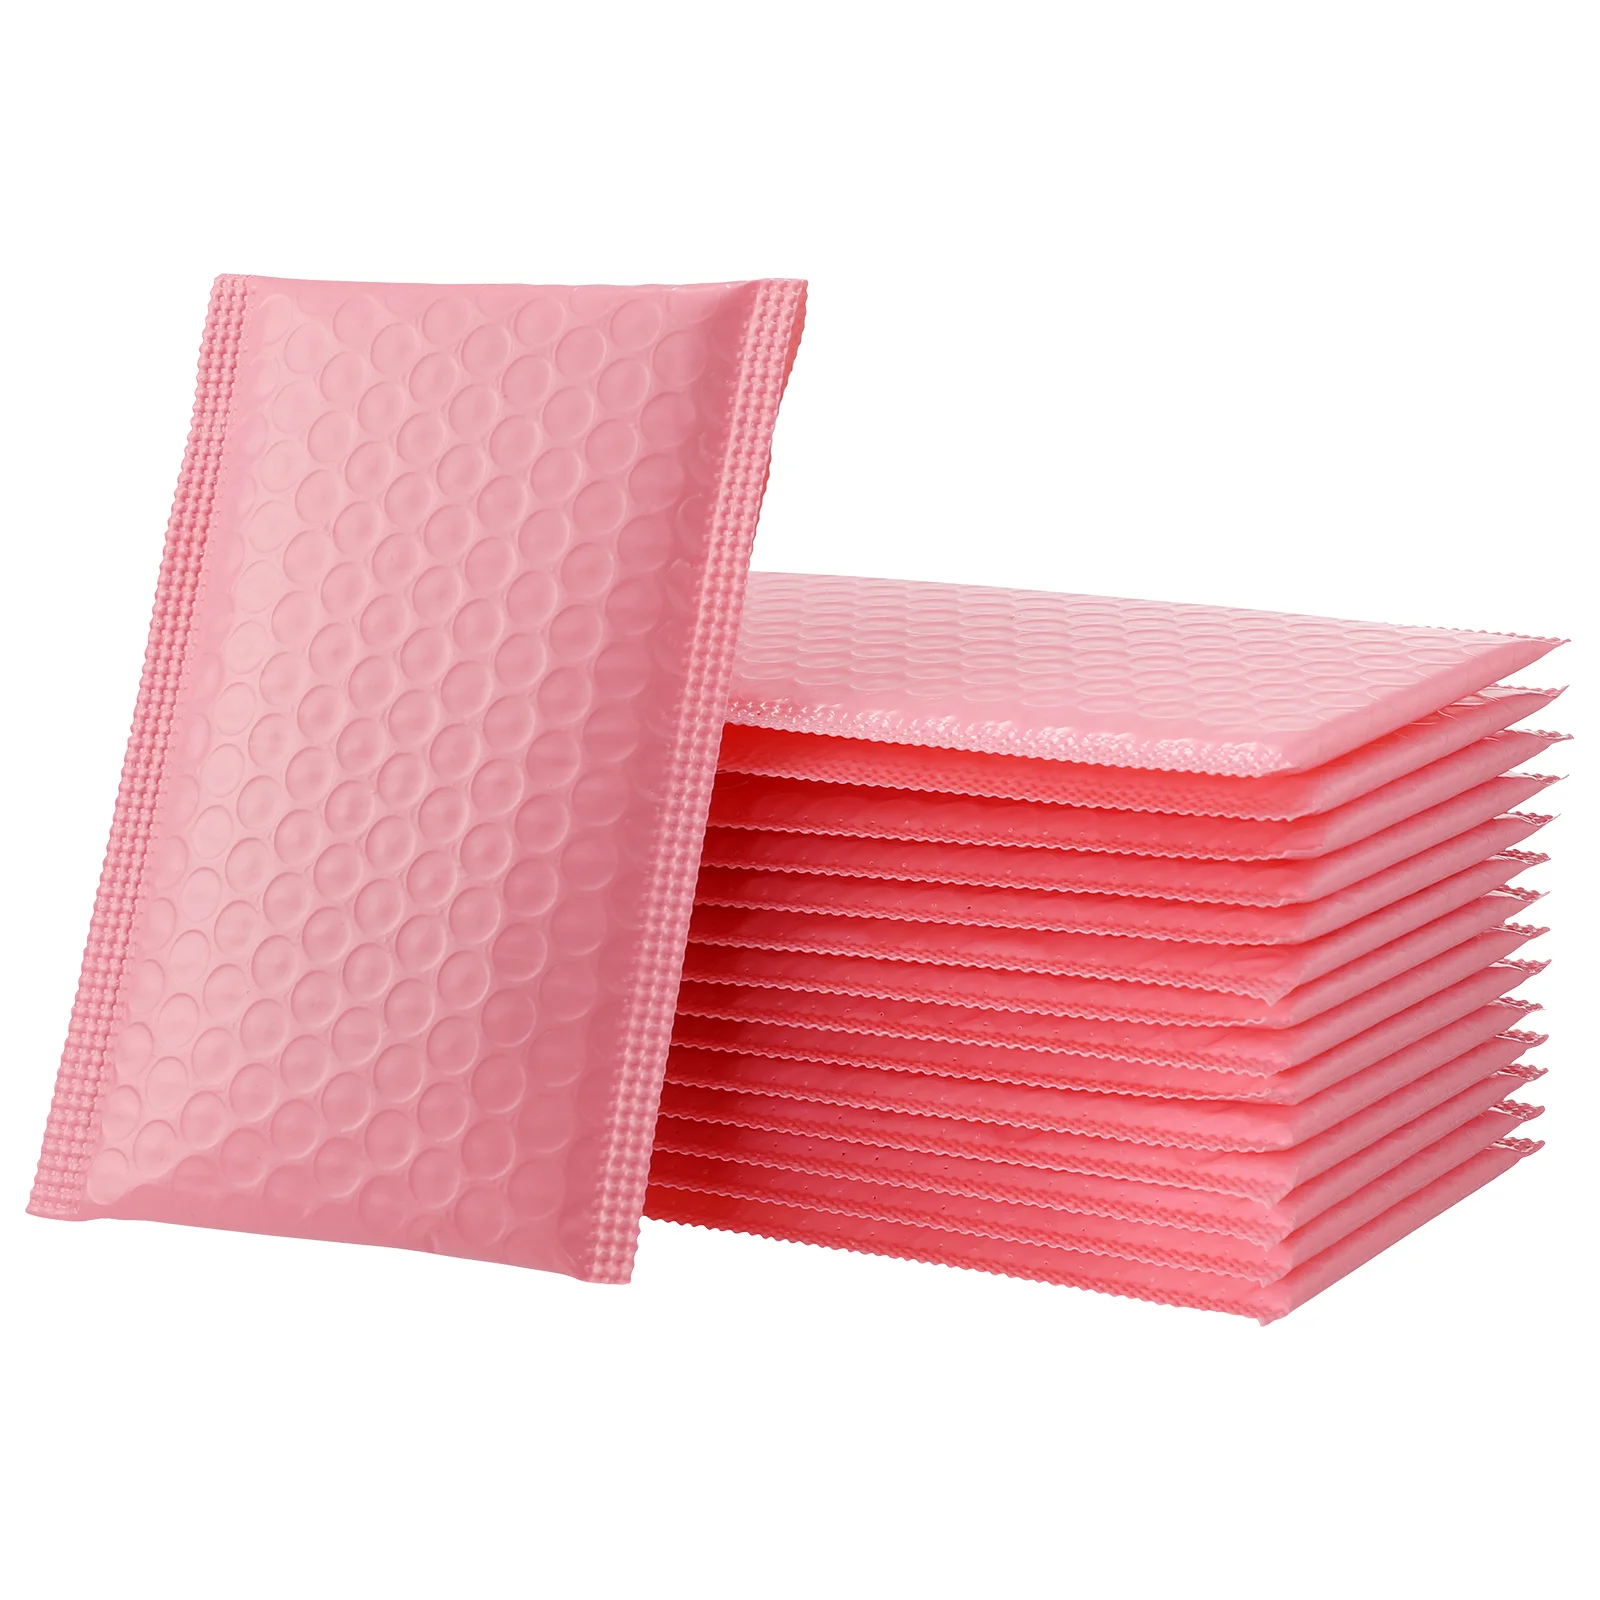 

50Pcs Poly Bubble Mailers Set Poly Padded Mailer Envelopes Waterproof Bubble Mailers Bags for Shipping, Packaging, Mailing Self